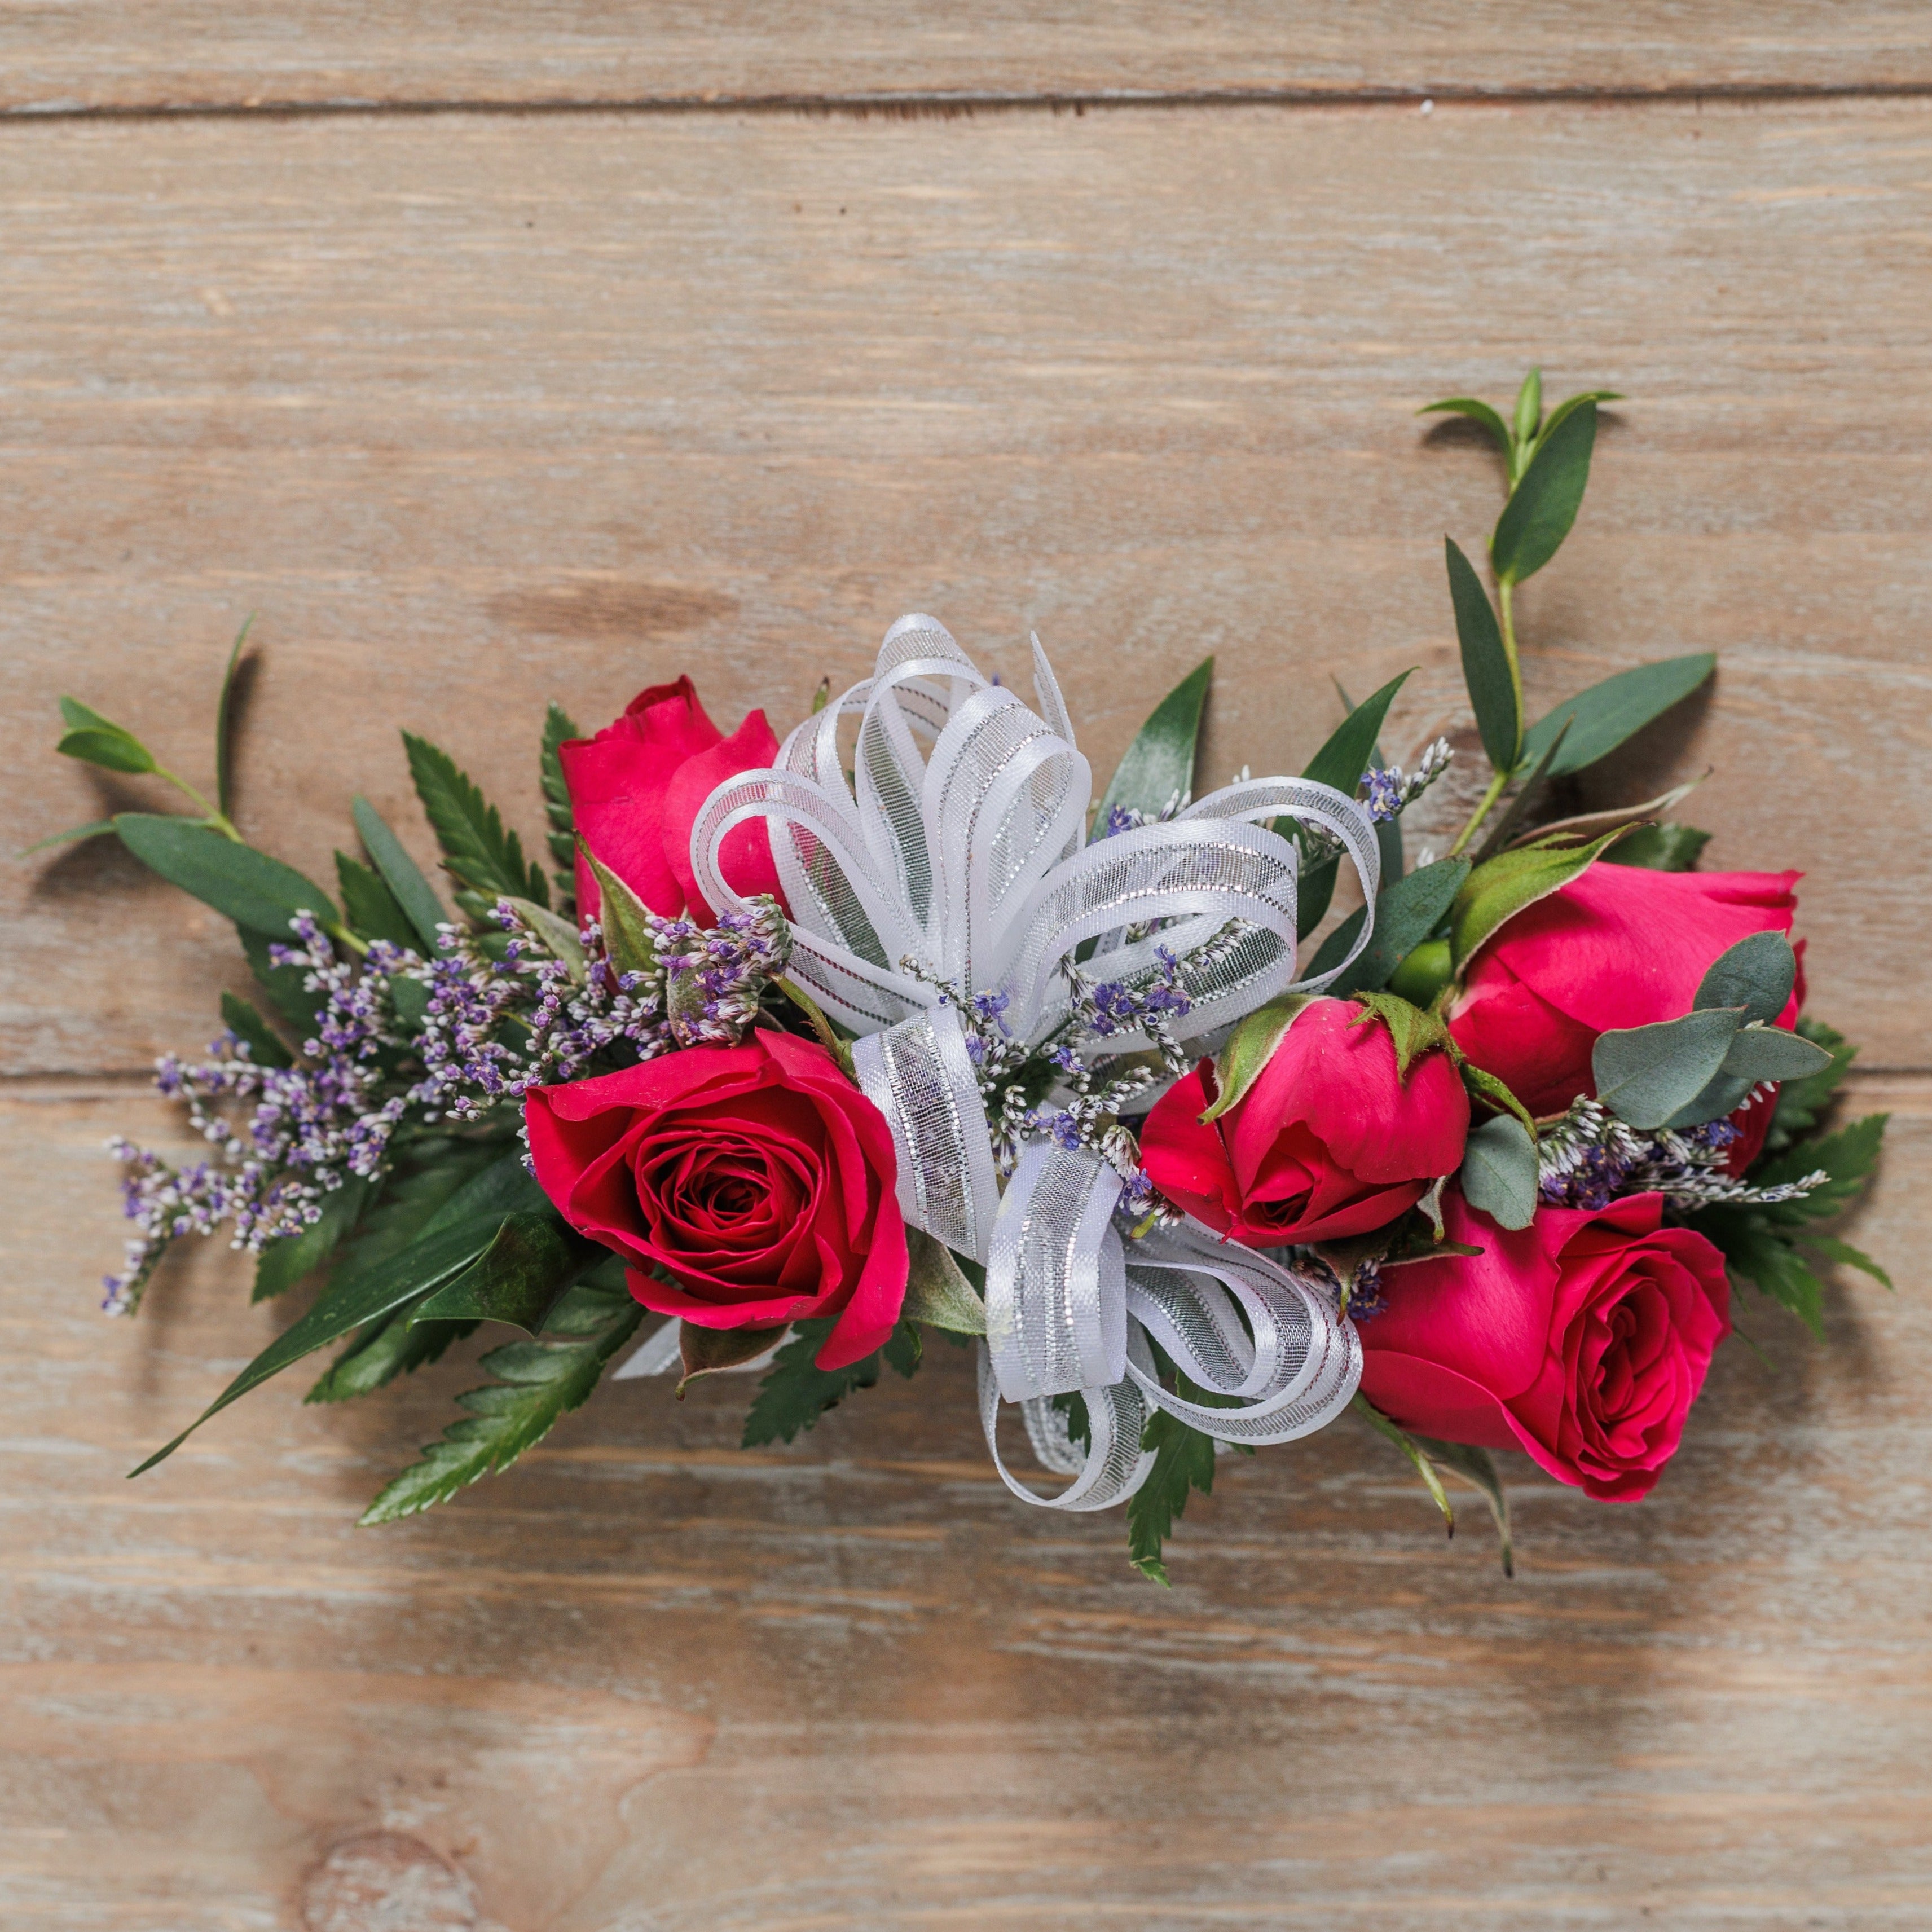 A wrist corsage with hot pink spray roses and silver ribbon.